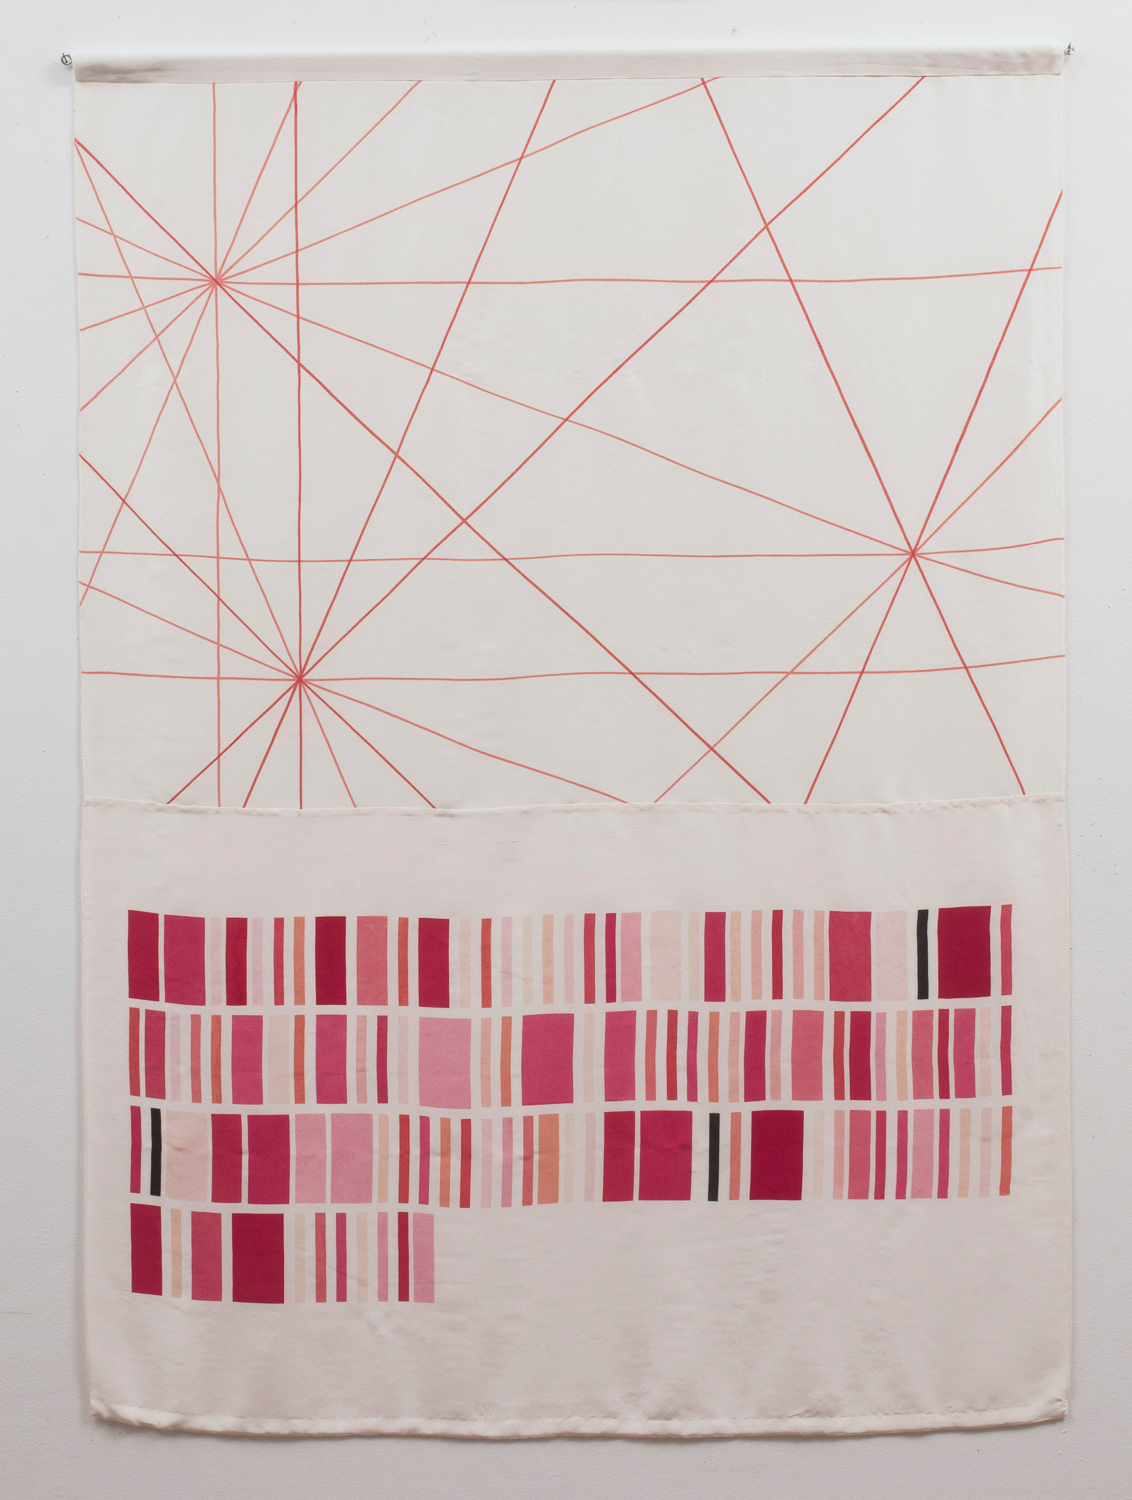 A screenprint from "After Ptolemy" by Sarah Hulsey